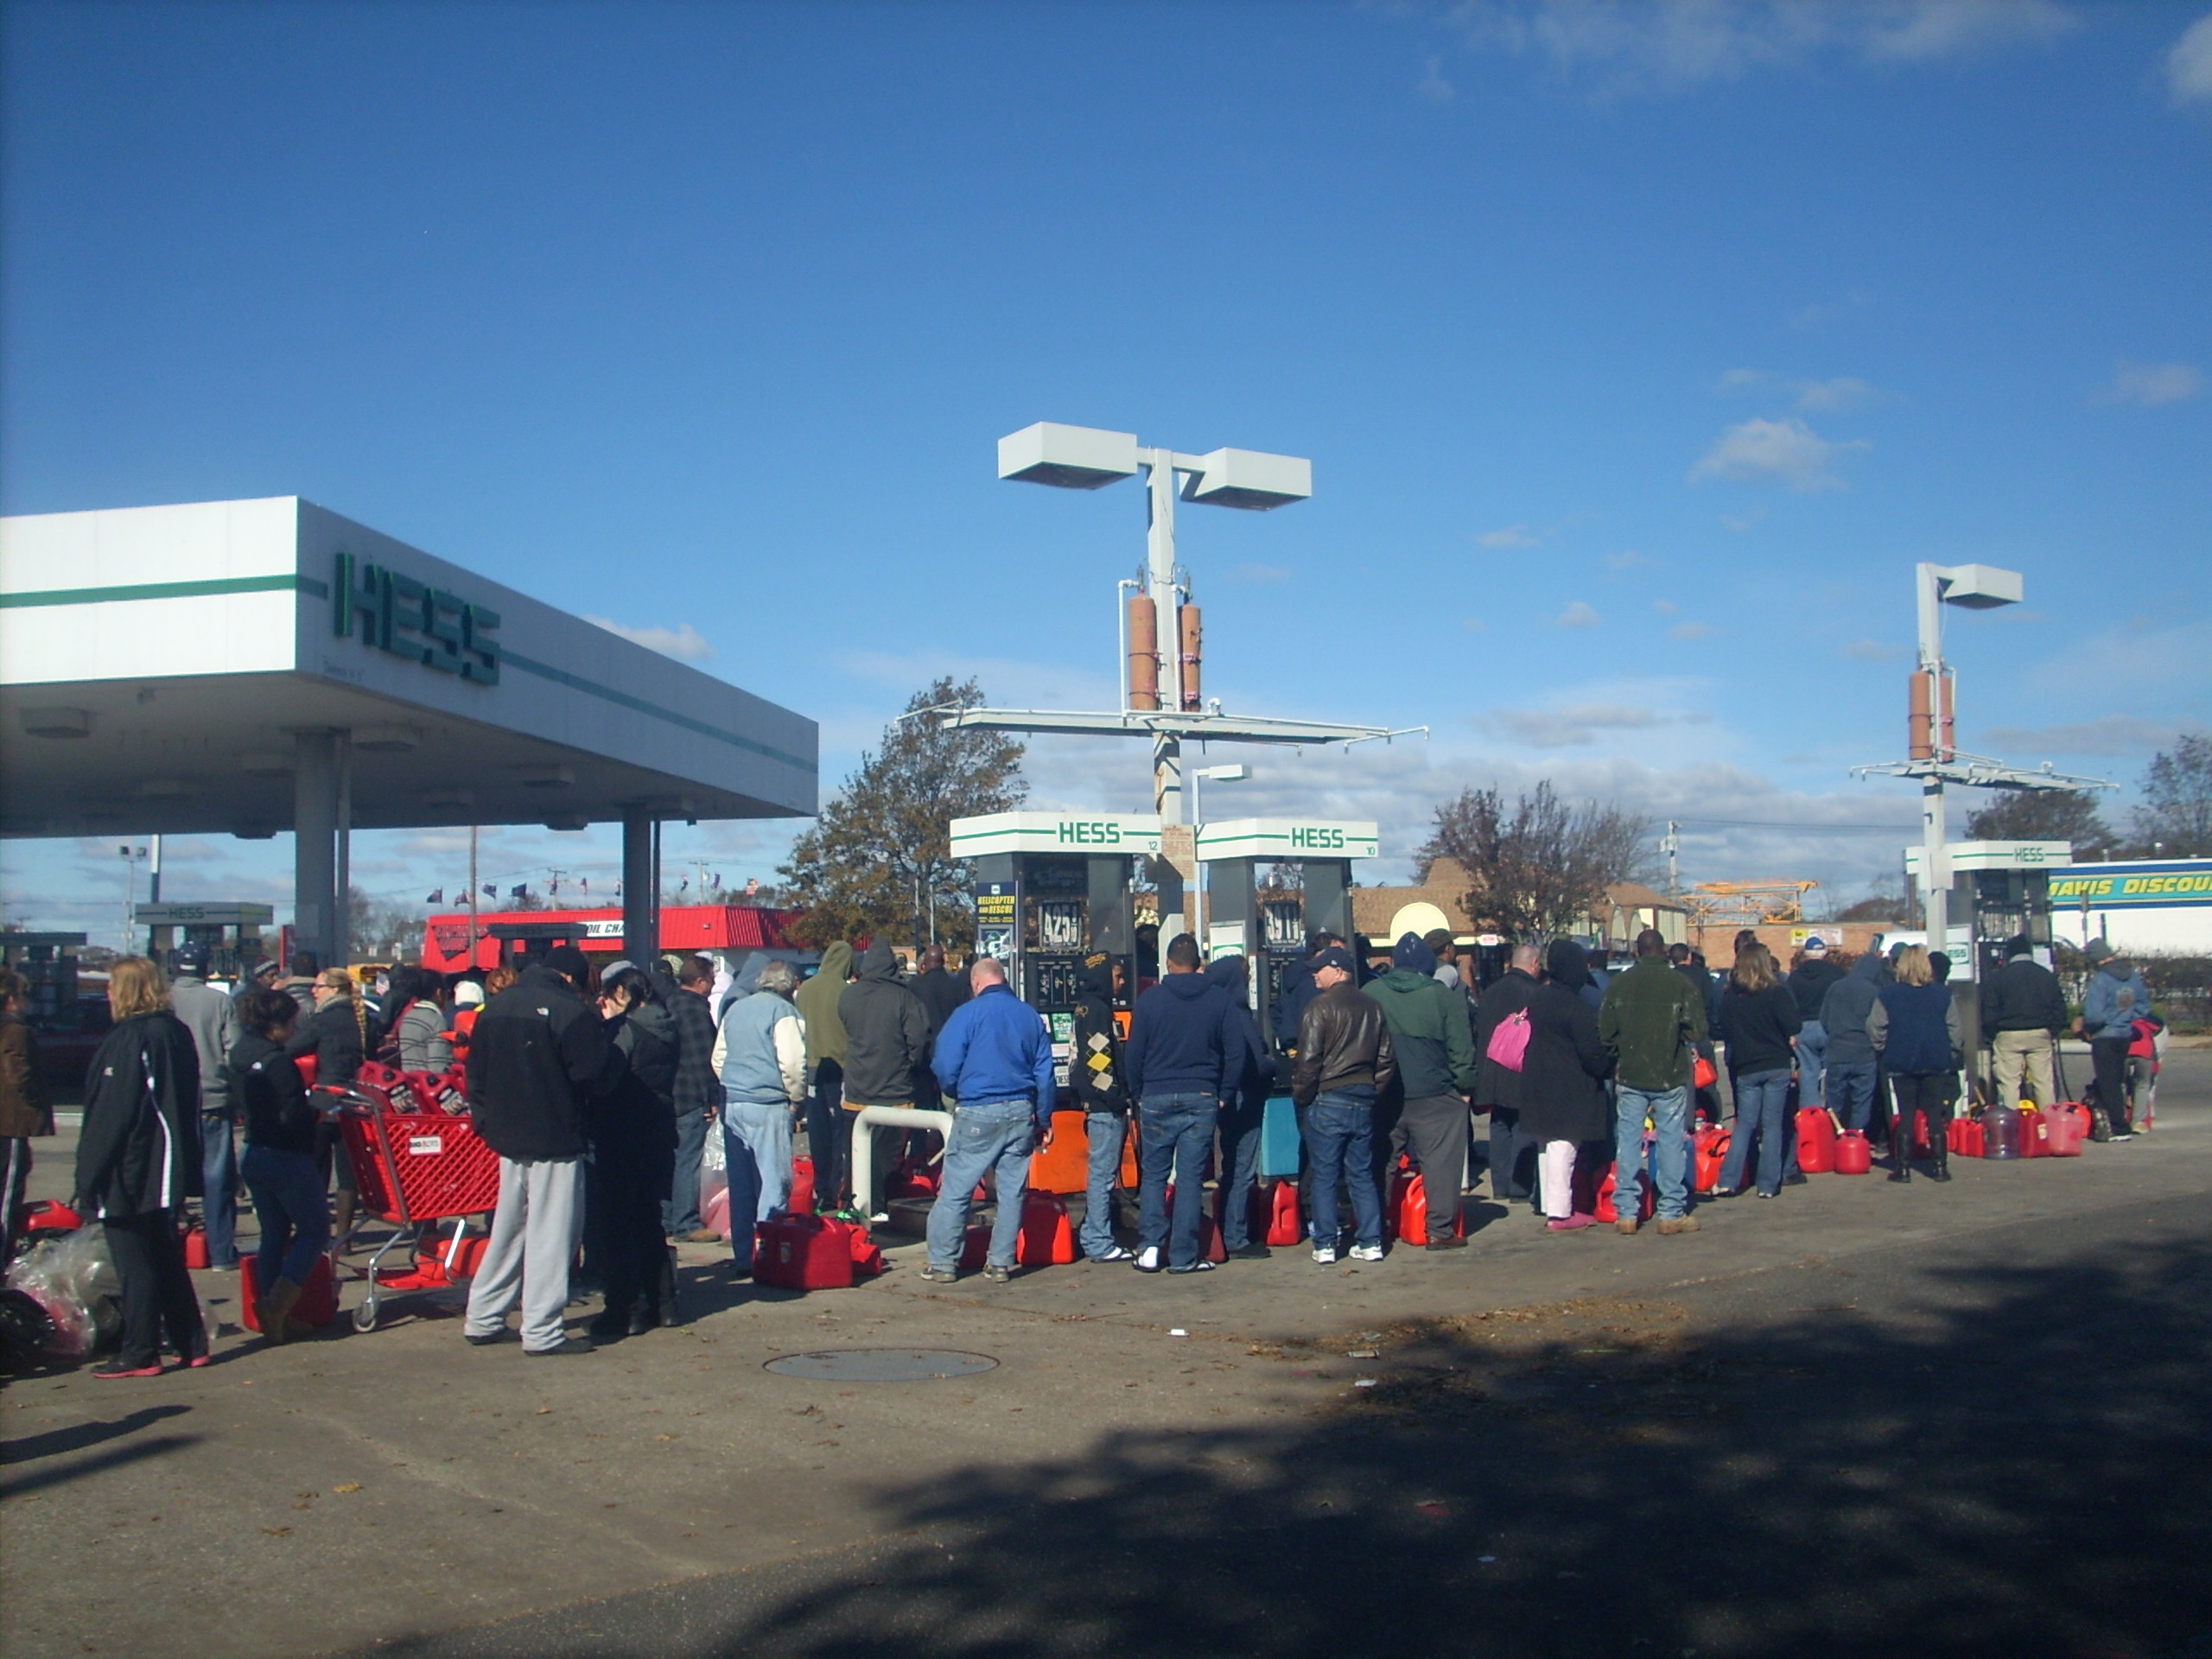 Hundreds of people swarmed a Hess gas station on Sunrise Highway in Lindenhurst on foot and by car Saturday, Nov. 3, 2012 to get as much fuel as they could as temperatures continued to drop and more than 700,000 residents remained without heat or electricity one week after Hurricane Sandy wreaked devastation across the Northeast. It was a familiar scene across Long Island. (Christopher Twarowski/Long Island Press)